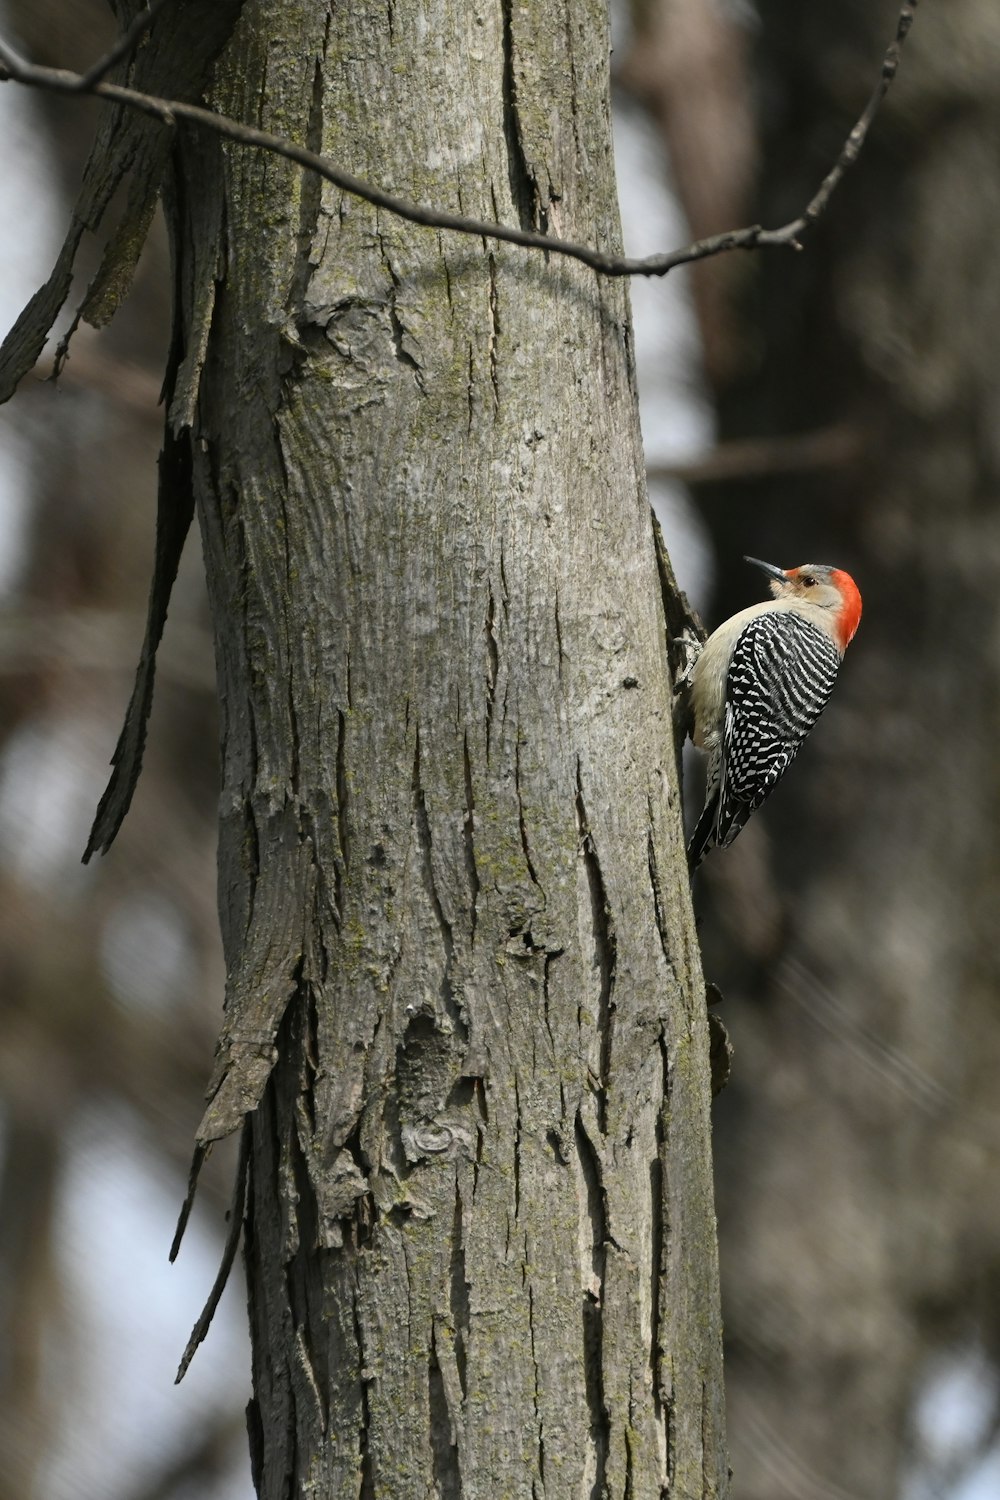 a woodpecker climbing up the side of a tree